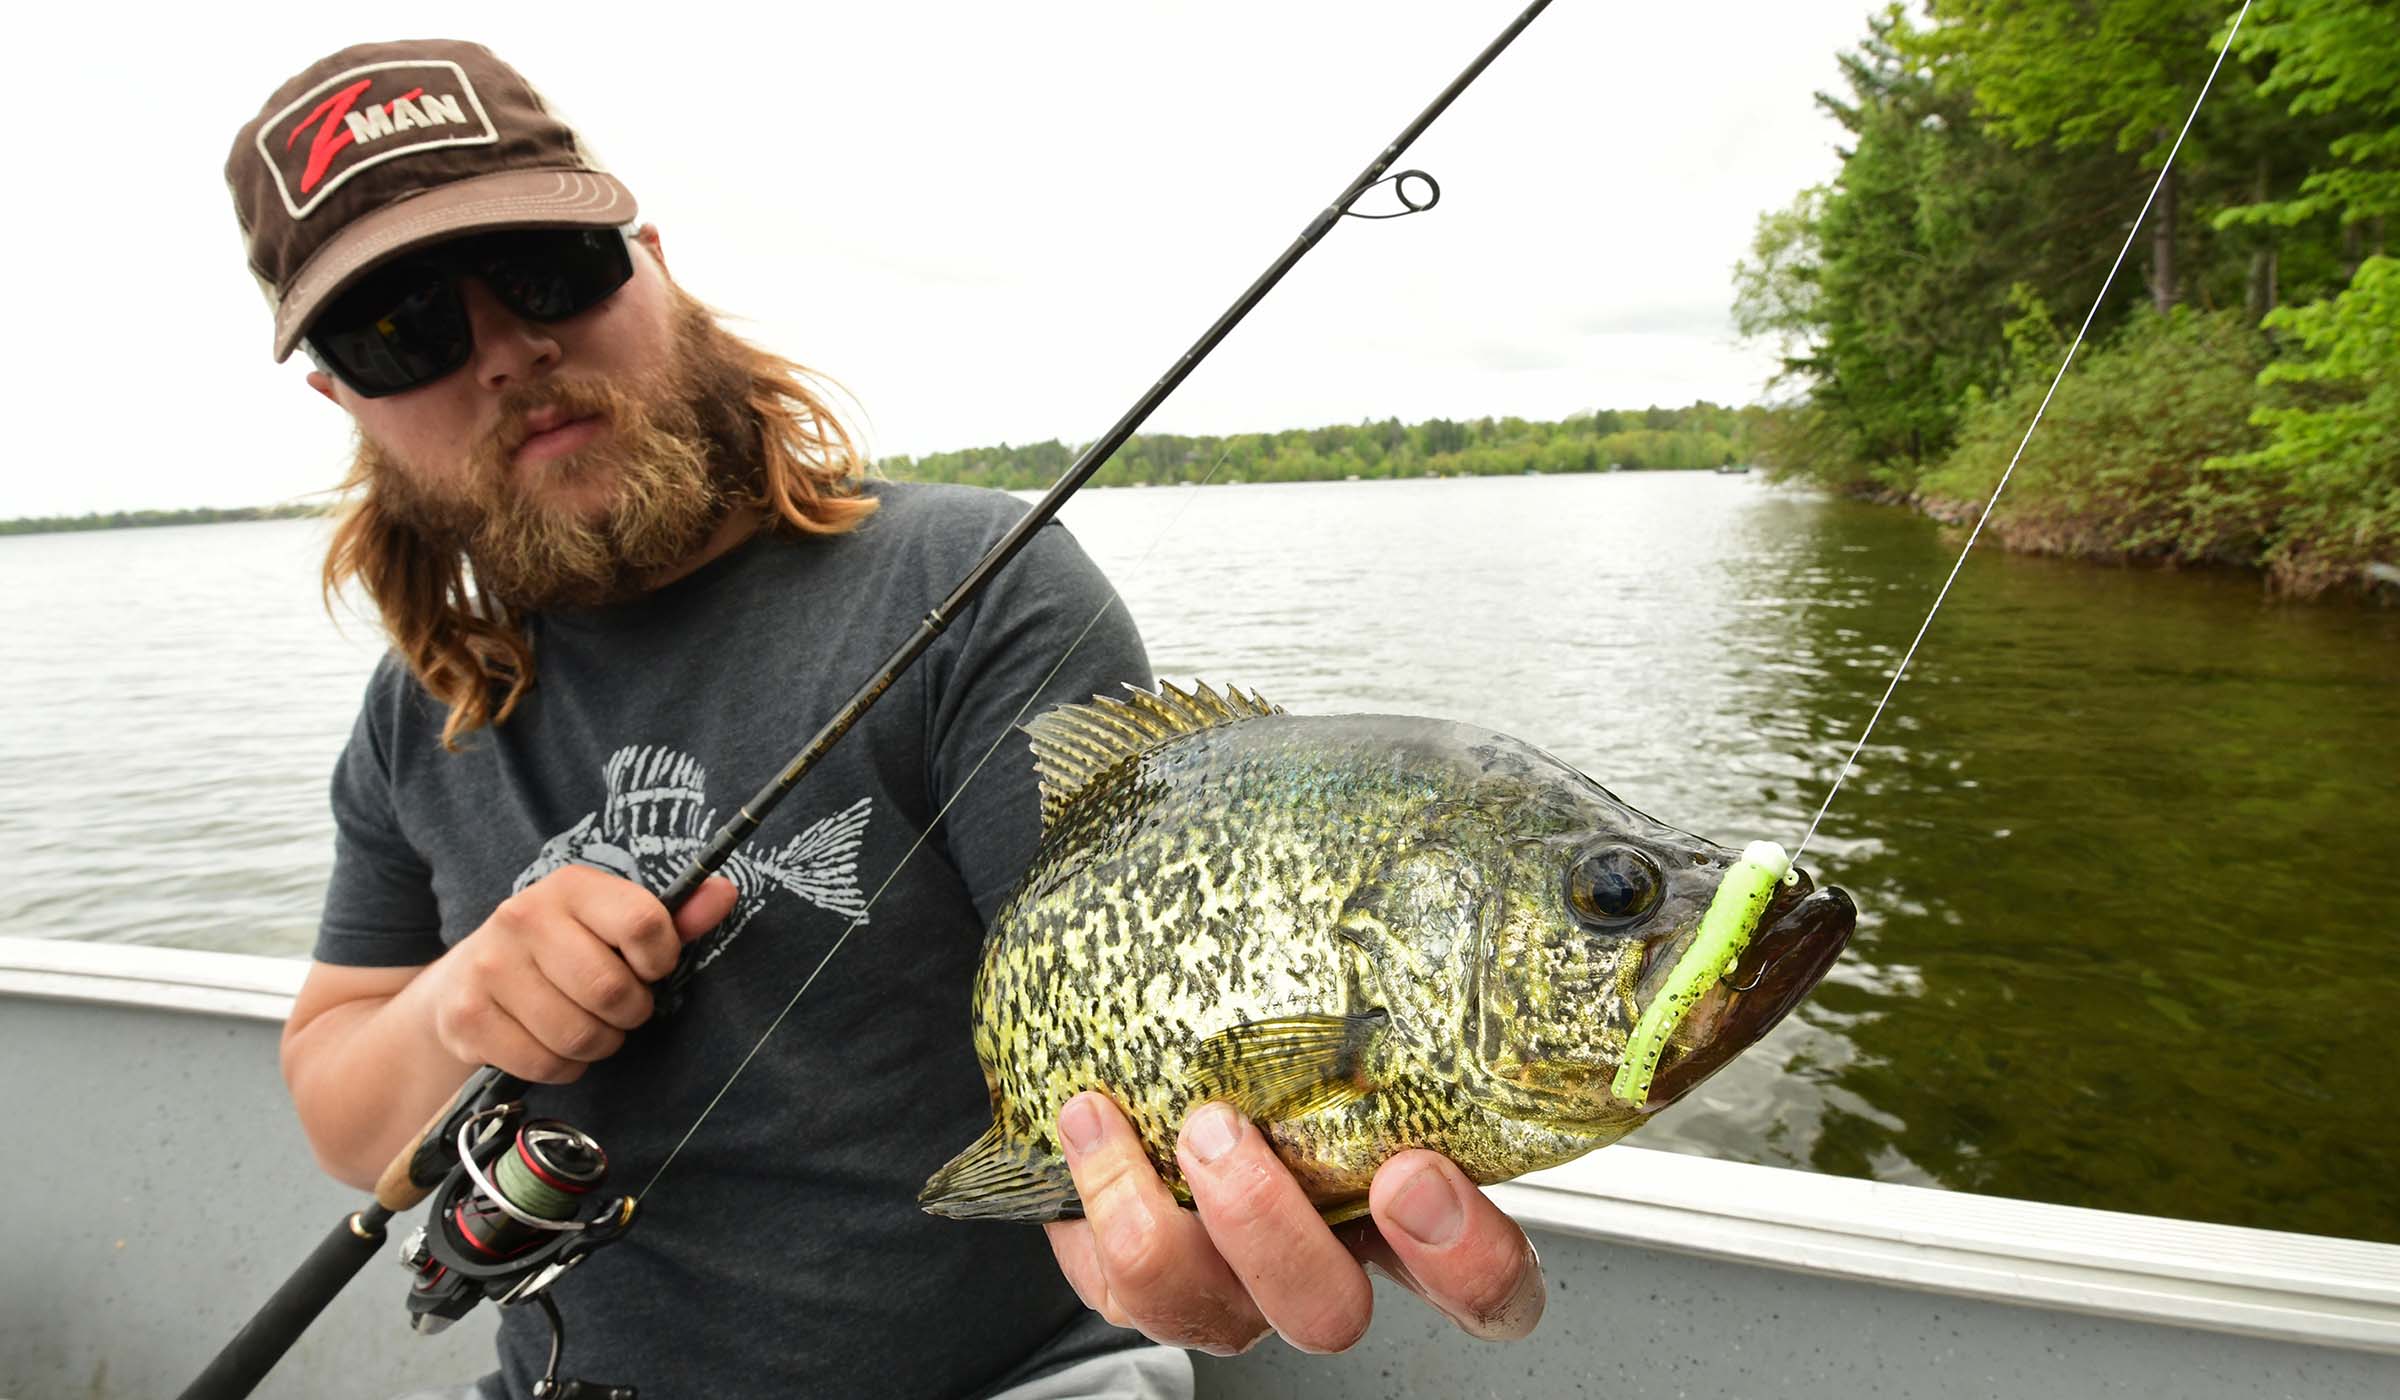 The Best Fishing Lines for Crappie: Braid, Mono, Copolymer, and Fluorocarbon